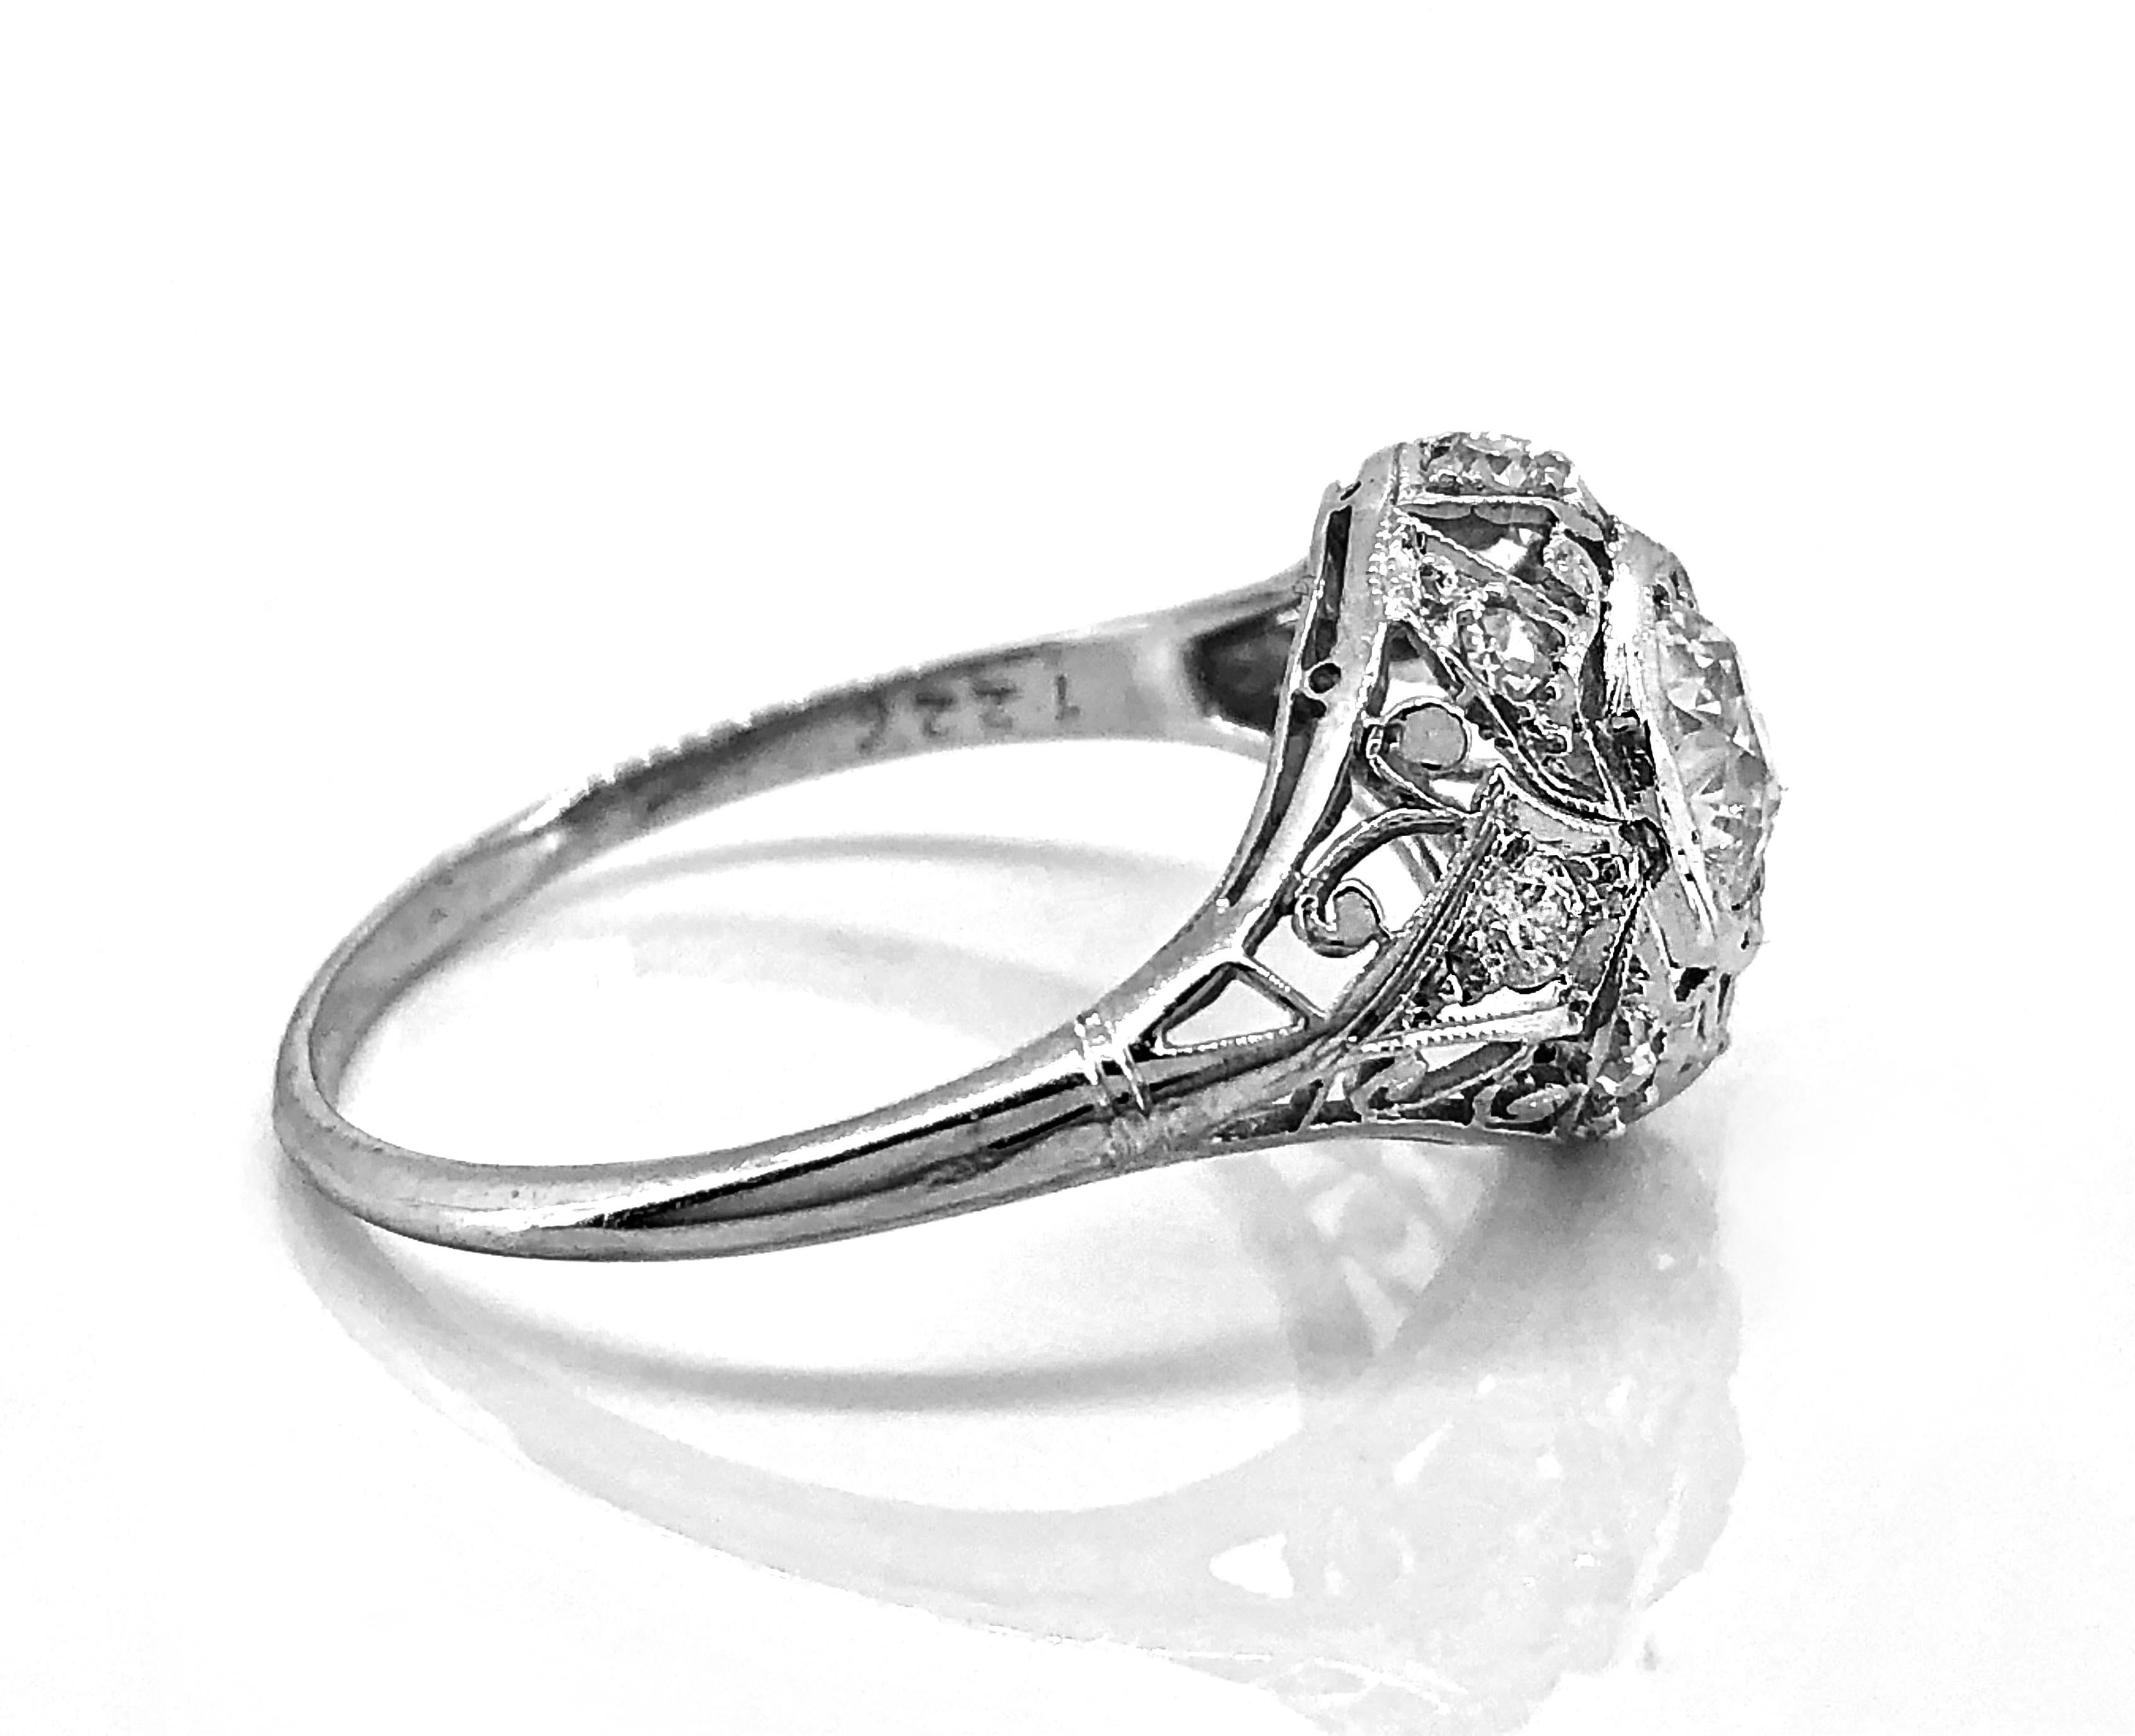 An artfully designed Edwardian diamond Antique engagement ring featuring a beautiful European cut diamond weighing .60ct. Apx. with VVS2 clarity and I color. The mounting is extraordinarily crafted in platinum with meticulous filigree and .33ct.